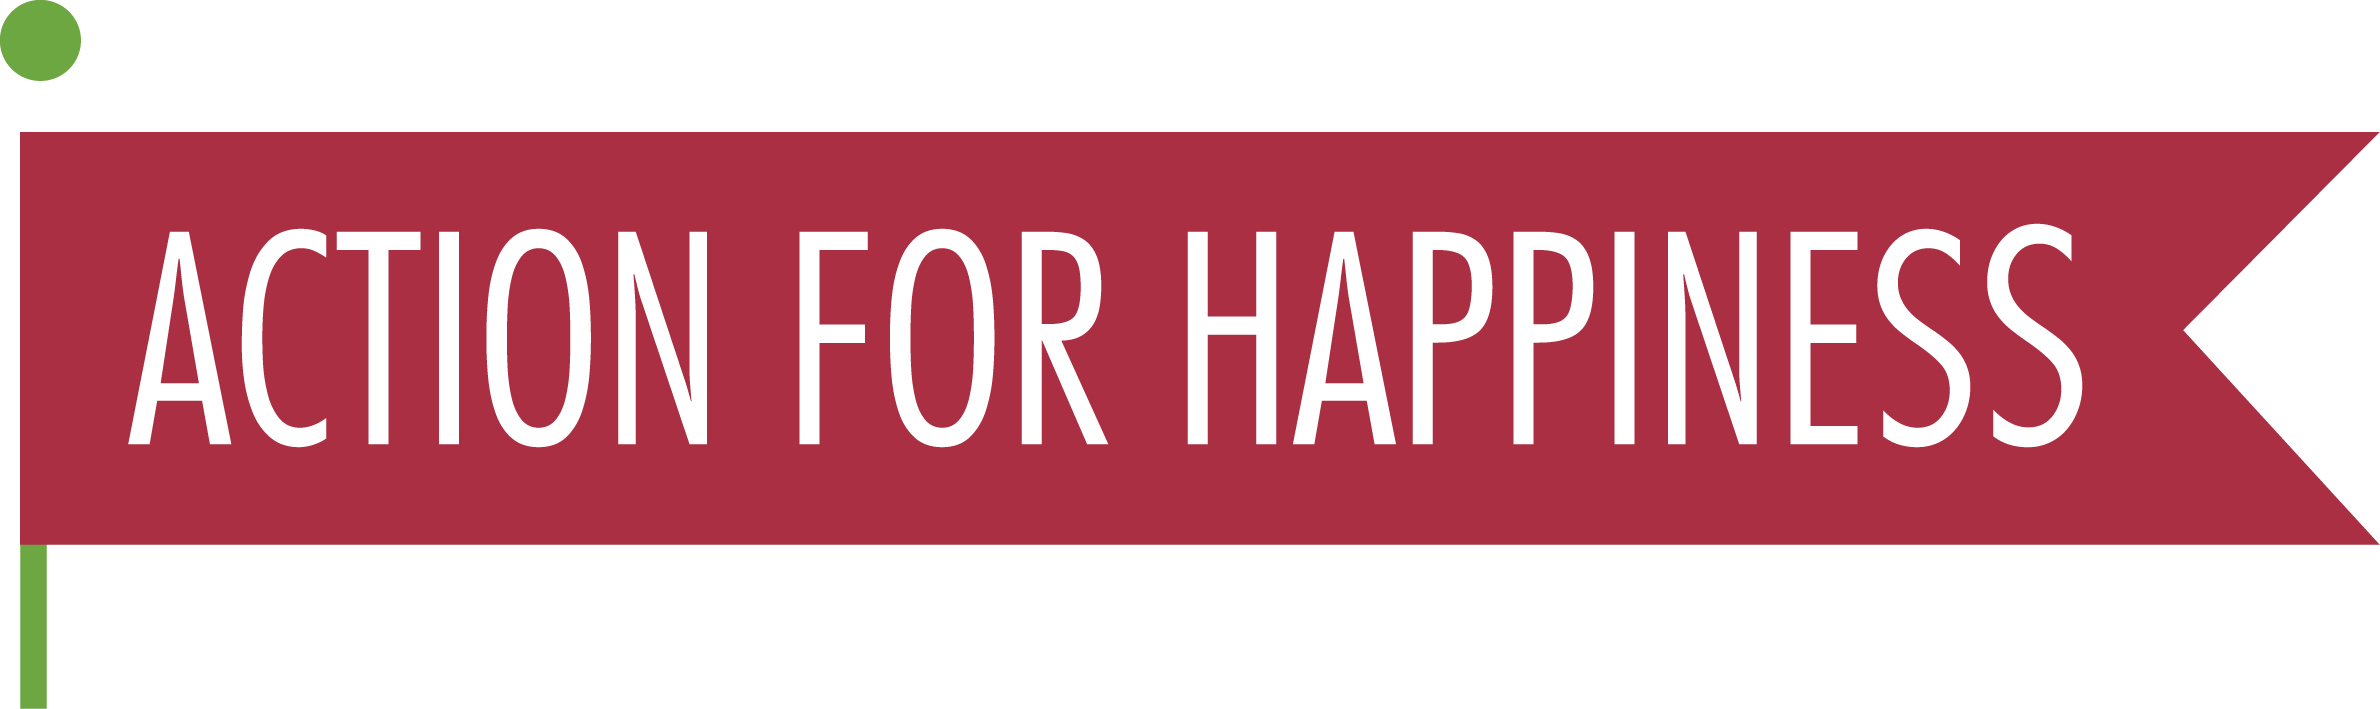 Action for Happiness logo